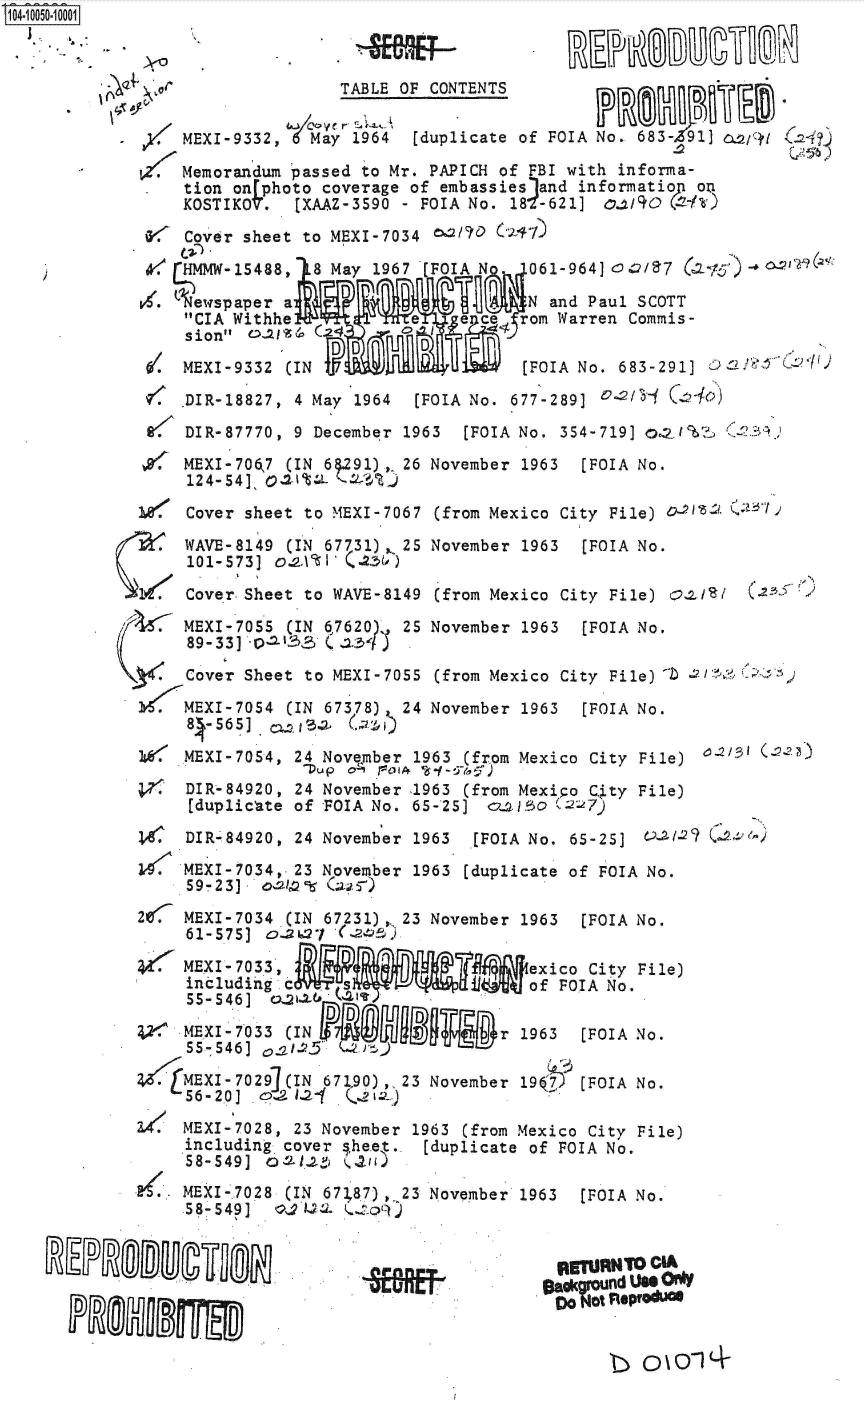 handle is hein.jfk/jfkarch36014 and id is 1 raw text is: S1O4~iOO5O~1OOO1
   J.. i'.:


-
}


.DIR-18827, 4 May 1964 [FOIA No. 677-289]      C` 40)
DIR-87770, 9 December 1963 [FOIA No. 354-719) o...1%Z. _ CnQ3'


eK


$r  MEXI-706,7 (IN 6 91) , 26 November 1963 [FOIA No.
     124-54] CG2AtL L39
bV   Cover sheet to MEXI-7067 (from Mexico City File) odit2  i
     WAVE-8149 (IN 67731), 25 November 1963 [FOIA No.
     101-573] 0 \0I(3   )
bX0  Cover. Sheet to WAVE-8149 (from Mexico City File) C.2/0/

(   MEXI-7055 (IN 67620)  25 November 1963 [FOIA No.
     89-33]       (
     Cover Sheet to MEXI-7055 (from Mexico City File) D    t
;sr. MEXI-7054 (IN 67378) 24 November 1963 [FOIA No.


84-565] .114     -
MEXI-7054, 24 Novqmber 1963 (from Mexico City File)


   2DIR-84920, 24 November 1963 (from Mexico C. ty File)
     [duplichate of FOIA No. 65-25] e:-5o (227)
J4C  DIR-84920, 24 Novemb'er 1963 [FOIA No. 65-25] 0 Qi61
    MEXI-7034, 23 November 1963 [duplicate of FOIA No.
    59-23] .  l   (ar)
20. MEXI-7034 (IN 67231) ,. 23 November 1963 [FOIA No.
     61-575] o.227
     MEXI-7033                        exico City File)
     including .c                     of FOIA No.
     55-546]  .    (&1-V3,J1
 2  MEXI-7033 (IN                  r 1963  [FOIA No.
     55-546]ot5

 3IMEX I - 7029IN 67190)  23 November 19(: [FOIA No.
     56-20] Q.21        ?)


MEXI-7028, 23 November 1963 (from Mexico City File)
.including cover ;heet. [duplicate of FOIA No.
58-549] oI.2-Z   an)


MEXI-7028 (IN 67;87), 23 November 1963 [FOIA No.
58- 549] 0J12 .209


~L~flf~fC=


OUF


pjffRH TO CIA


tb 0  0i-4


/


                   TABLE OF CONTENTS

    MEXI-9332, 6 May 1964 [duplicate of FOIA No. 683- 1] Oar91 C24)

 .  Memorandum passed to Mr. PAPICH of FBI with informa-
    tion onrphoto coverage of embassies and informatiopn on
    KOSTIKOV.  [XAAZ-3590 - FOIA No. 180-621] o0i/4/0
Of  Cover sheet to MEXI-7034         7
   4 HMMW-15488, 8 May 1967 [FOIA N  061-964] 0/7   (a 16C  
 I. Lewspaper a                      N and Paul SCOTT
    CIA Withhe           e   e ce  rom Warren Commis-
    sion -21z  (2I     L                 N
    MEXI-9332 '(IN  [)     D[F0IA No. 683-291] 0O


0 2 . 1 (9 2 1)


REMSD90UCTIM1,


       P
_4EeVT_


